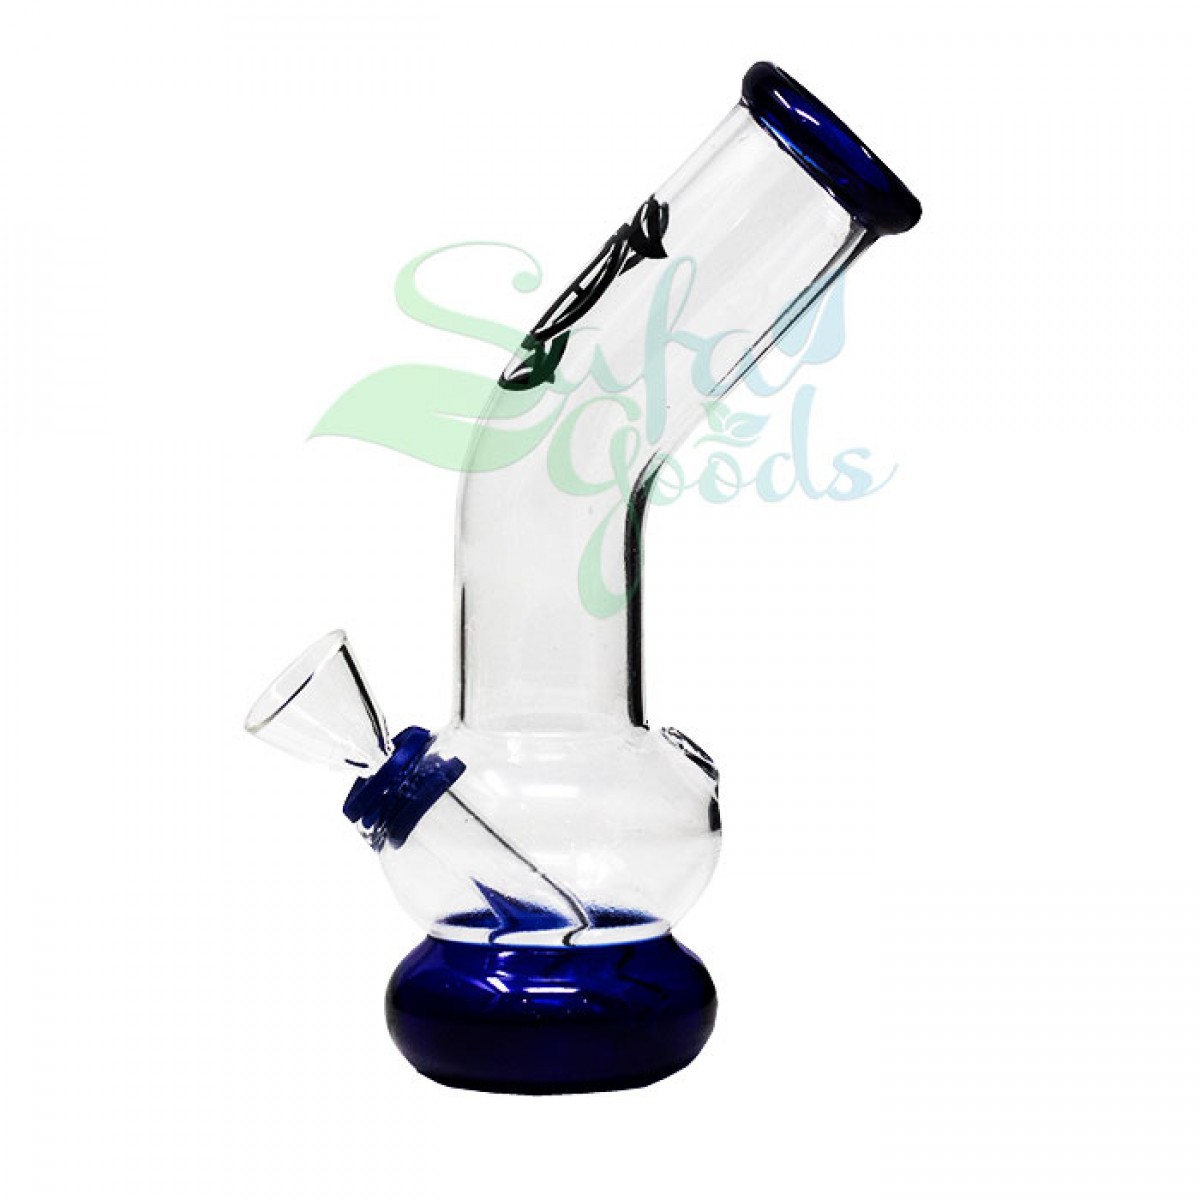 5 Inch Bent Neck OATH Rubber on Glass Water Pipe